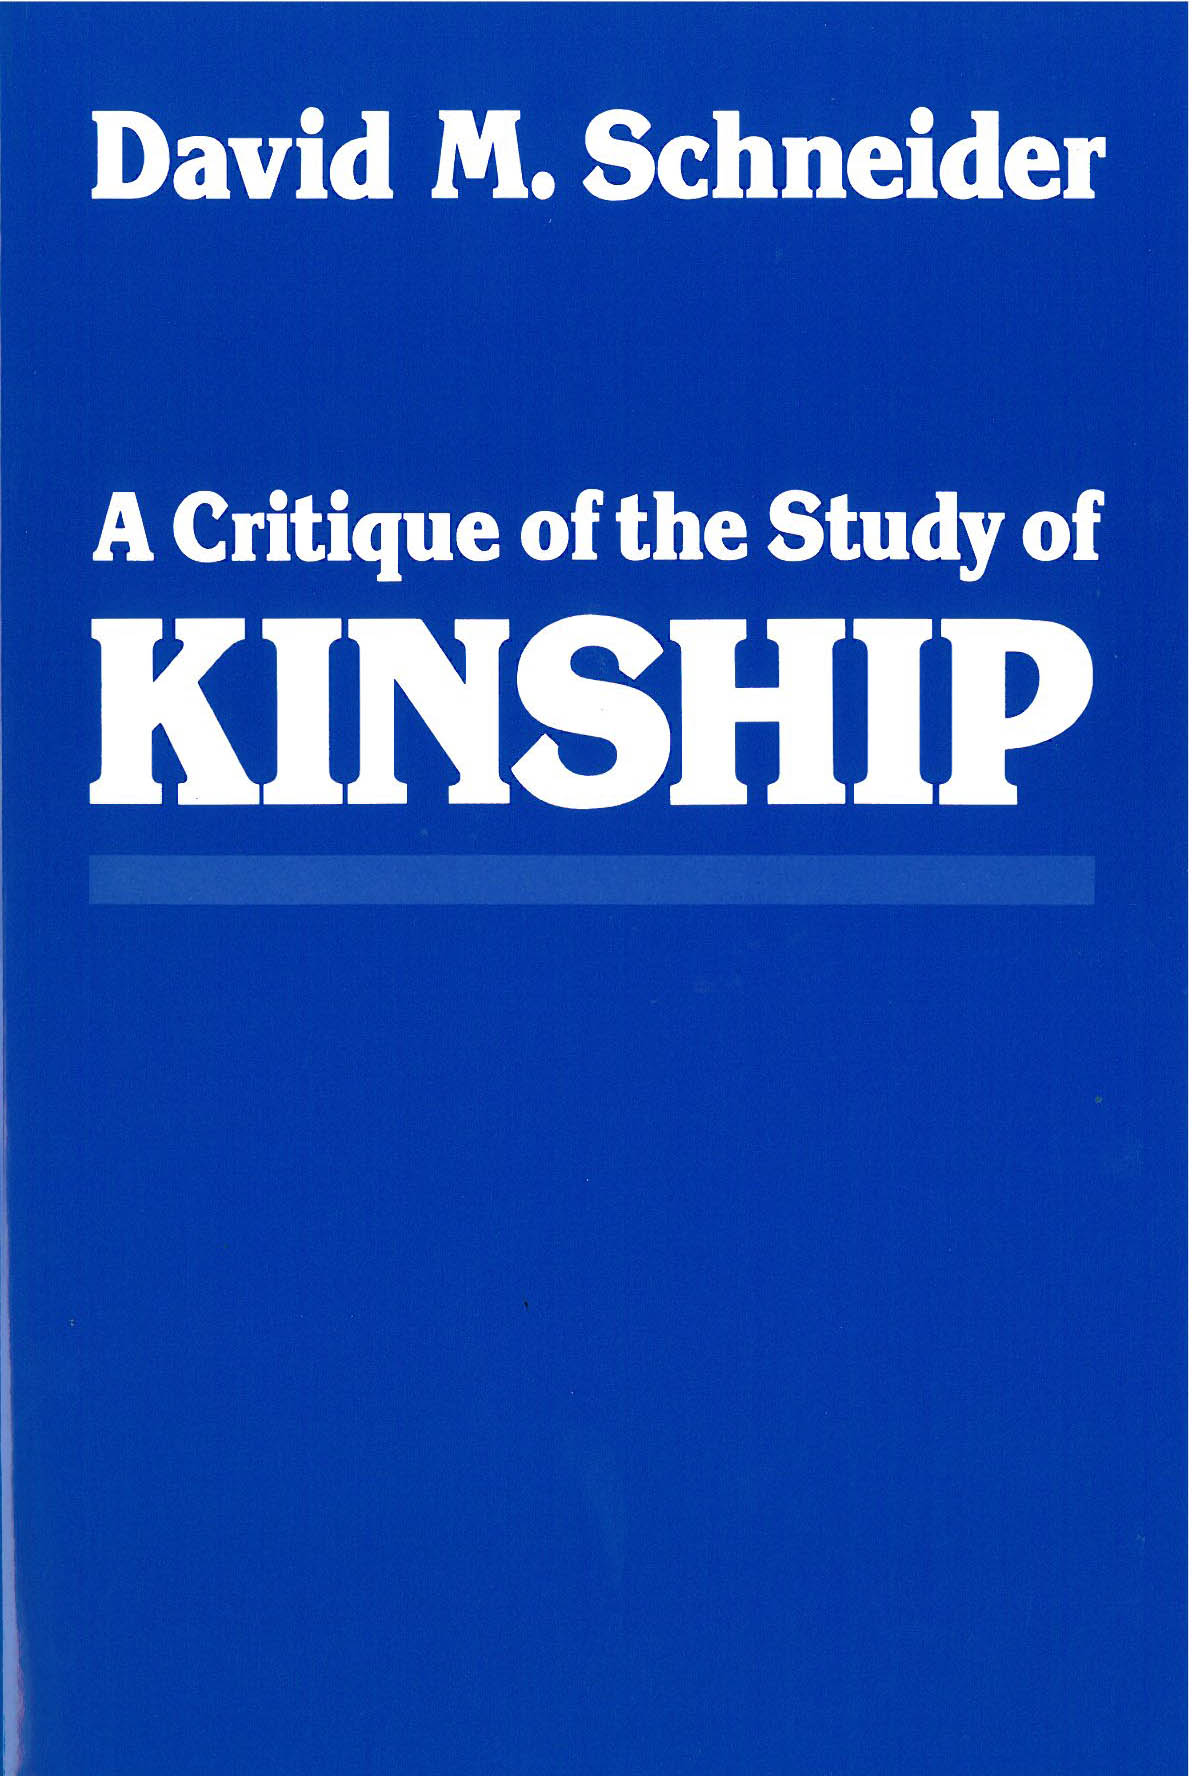 Critique of the Study of Kinship